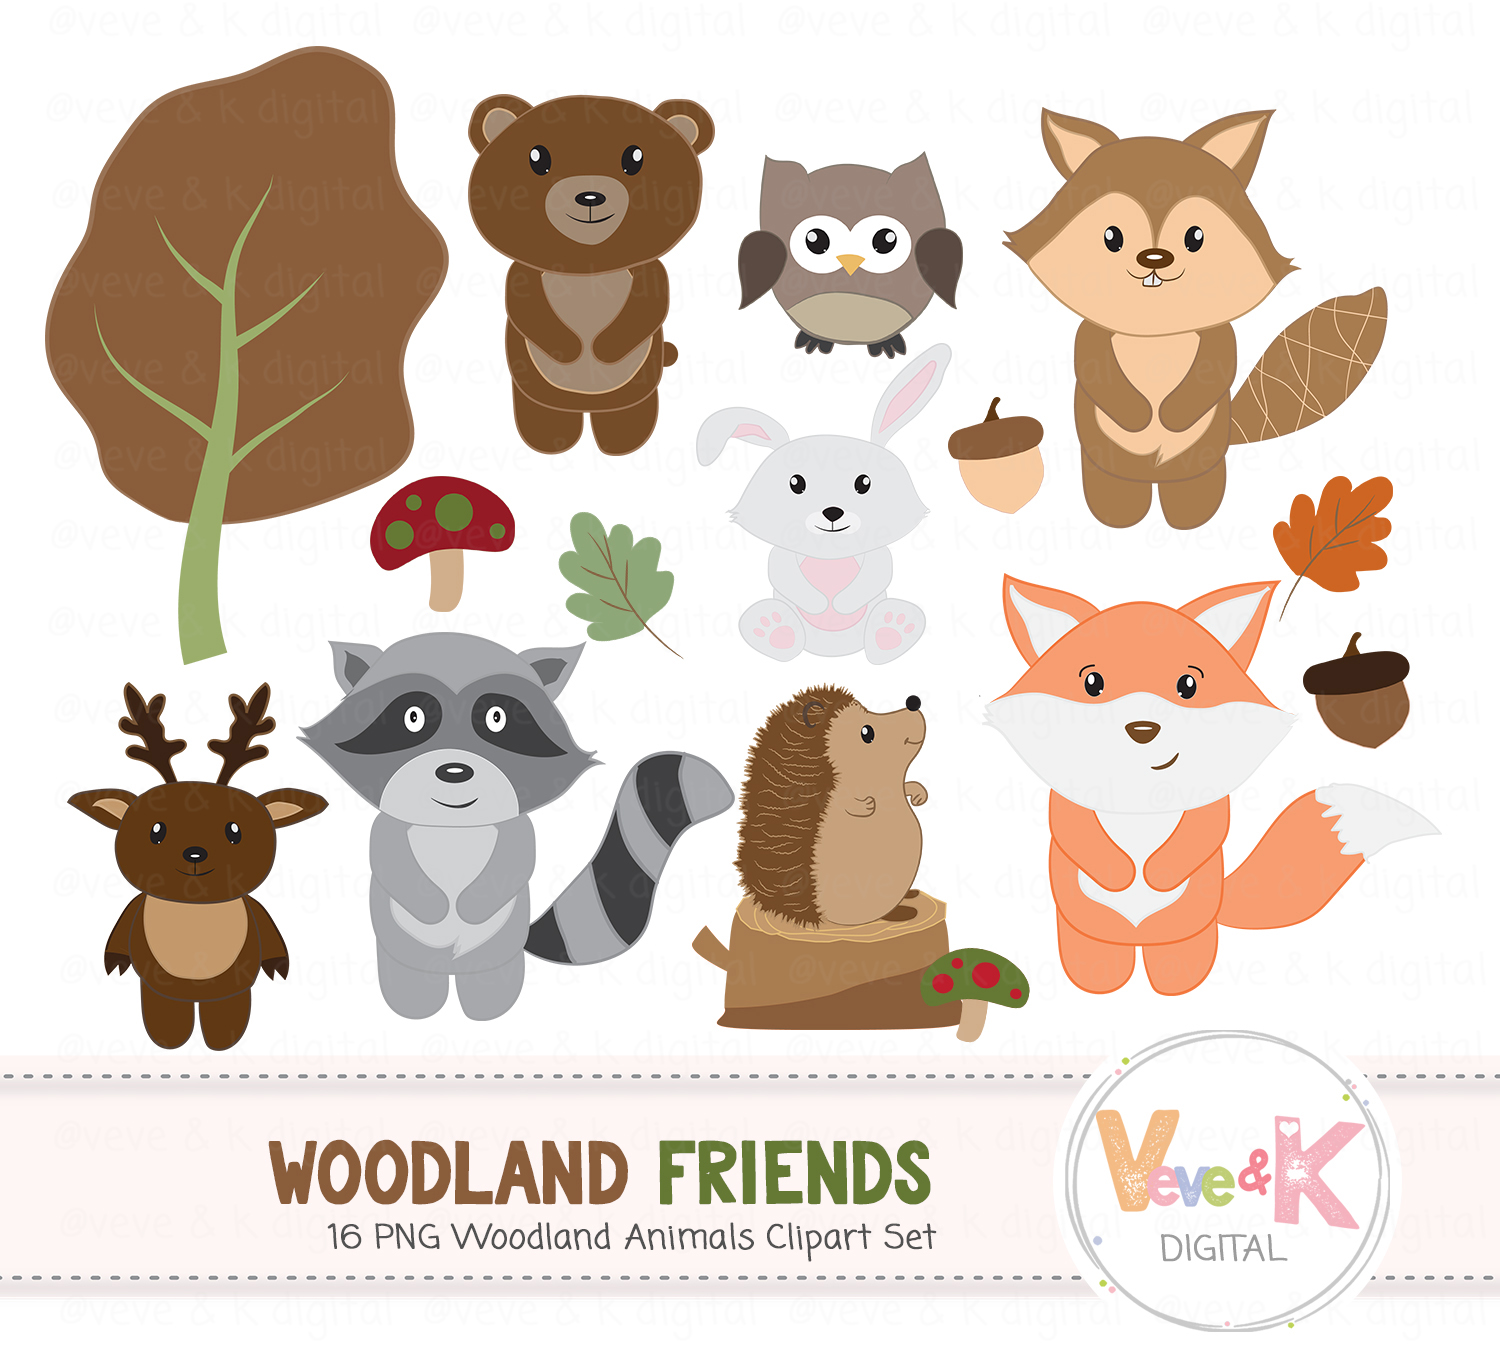 Woodland Animals Clipart Set, Woodland Creature Clipart, Forest Animals  Clipart, Woodland Critters, Fox racoon deer, Forest Critters.